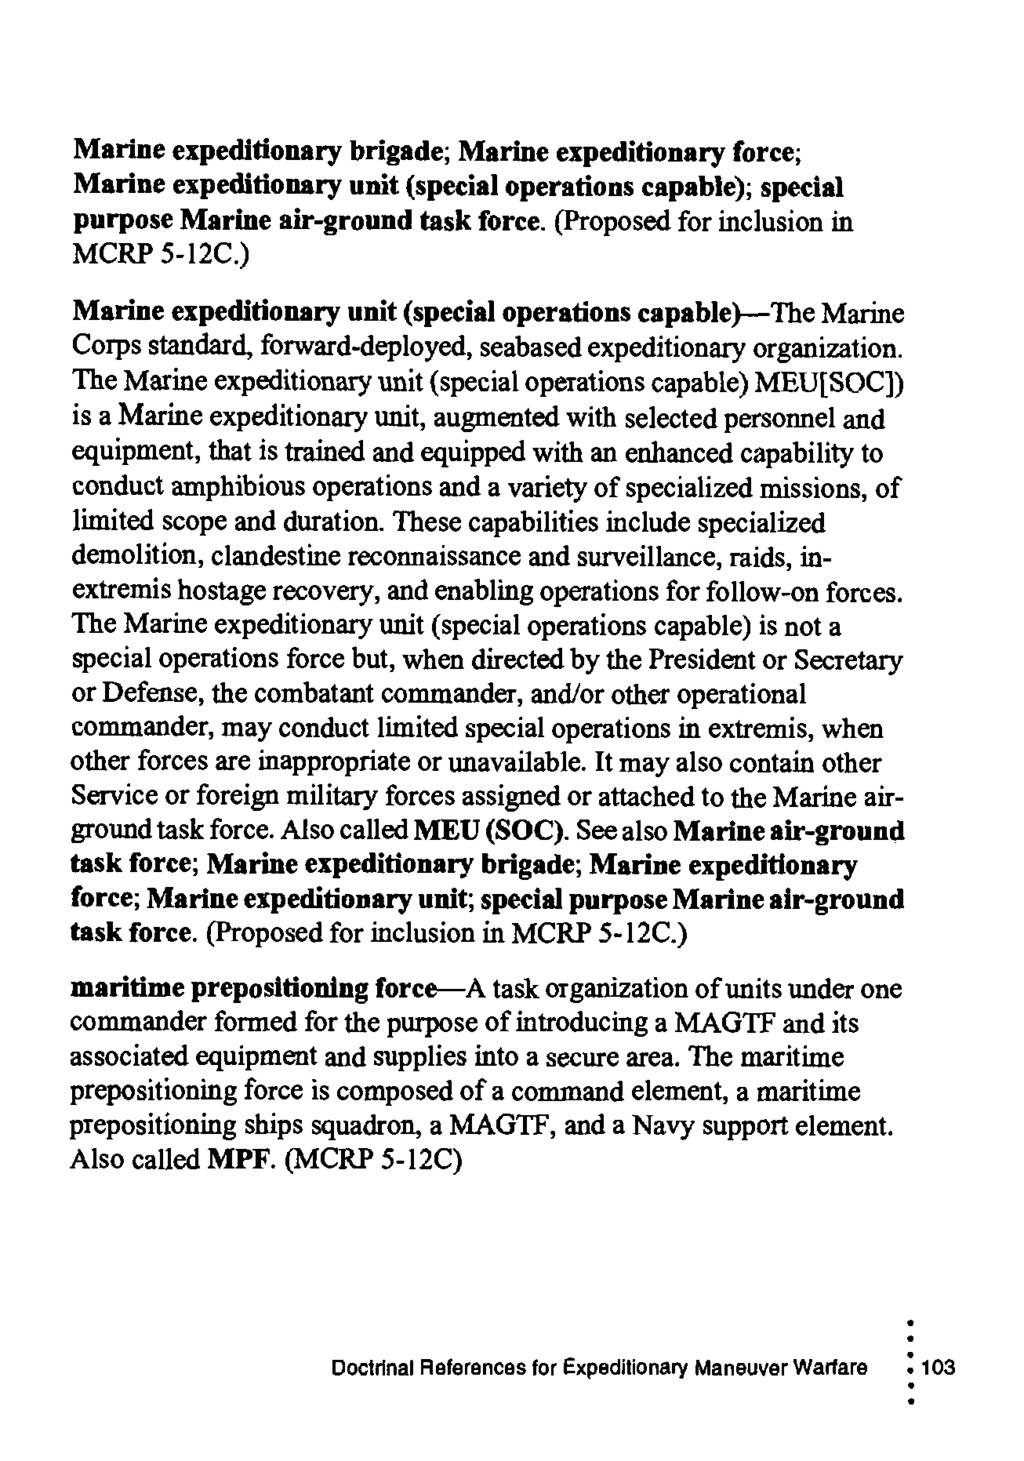 Marine expeditionary brigade; Marine expeditionary force; Marine expeditionary unit (special operations capable); special purpose Marine air-ground task force. (Proposed for inclusion in MCRP 5-12C.